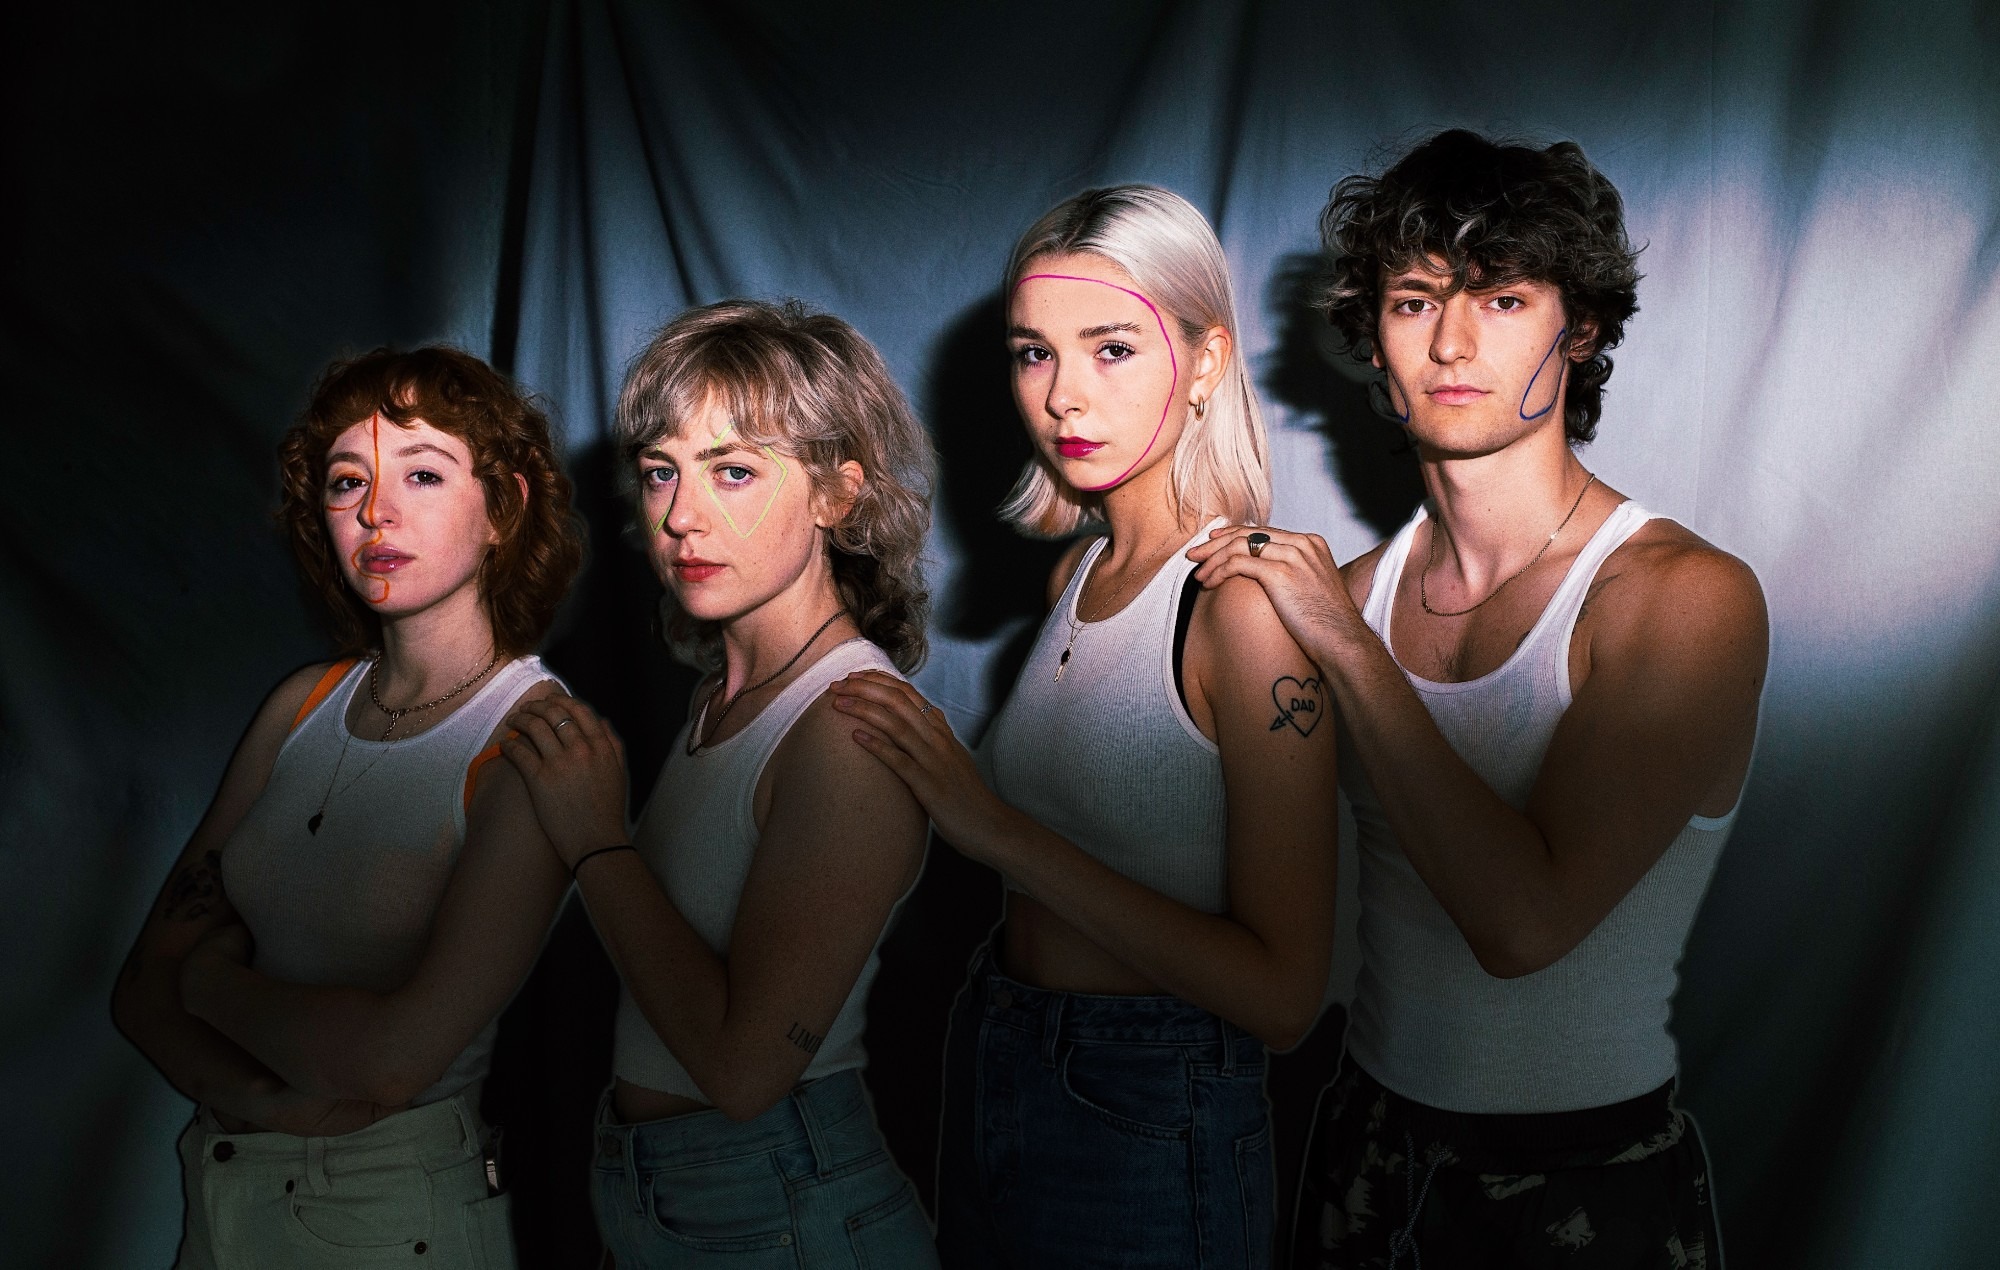 The Regrettes’ reinvention: “I want us to go as big as we can. I don’t see a ceiling for us”